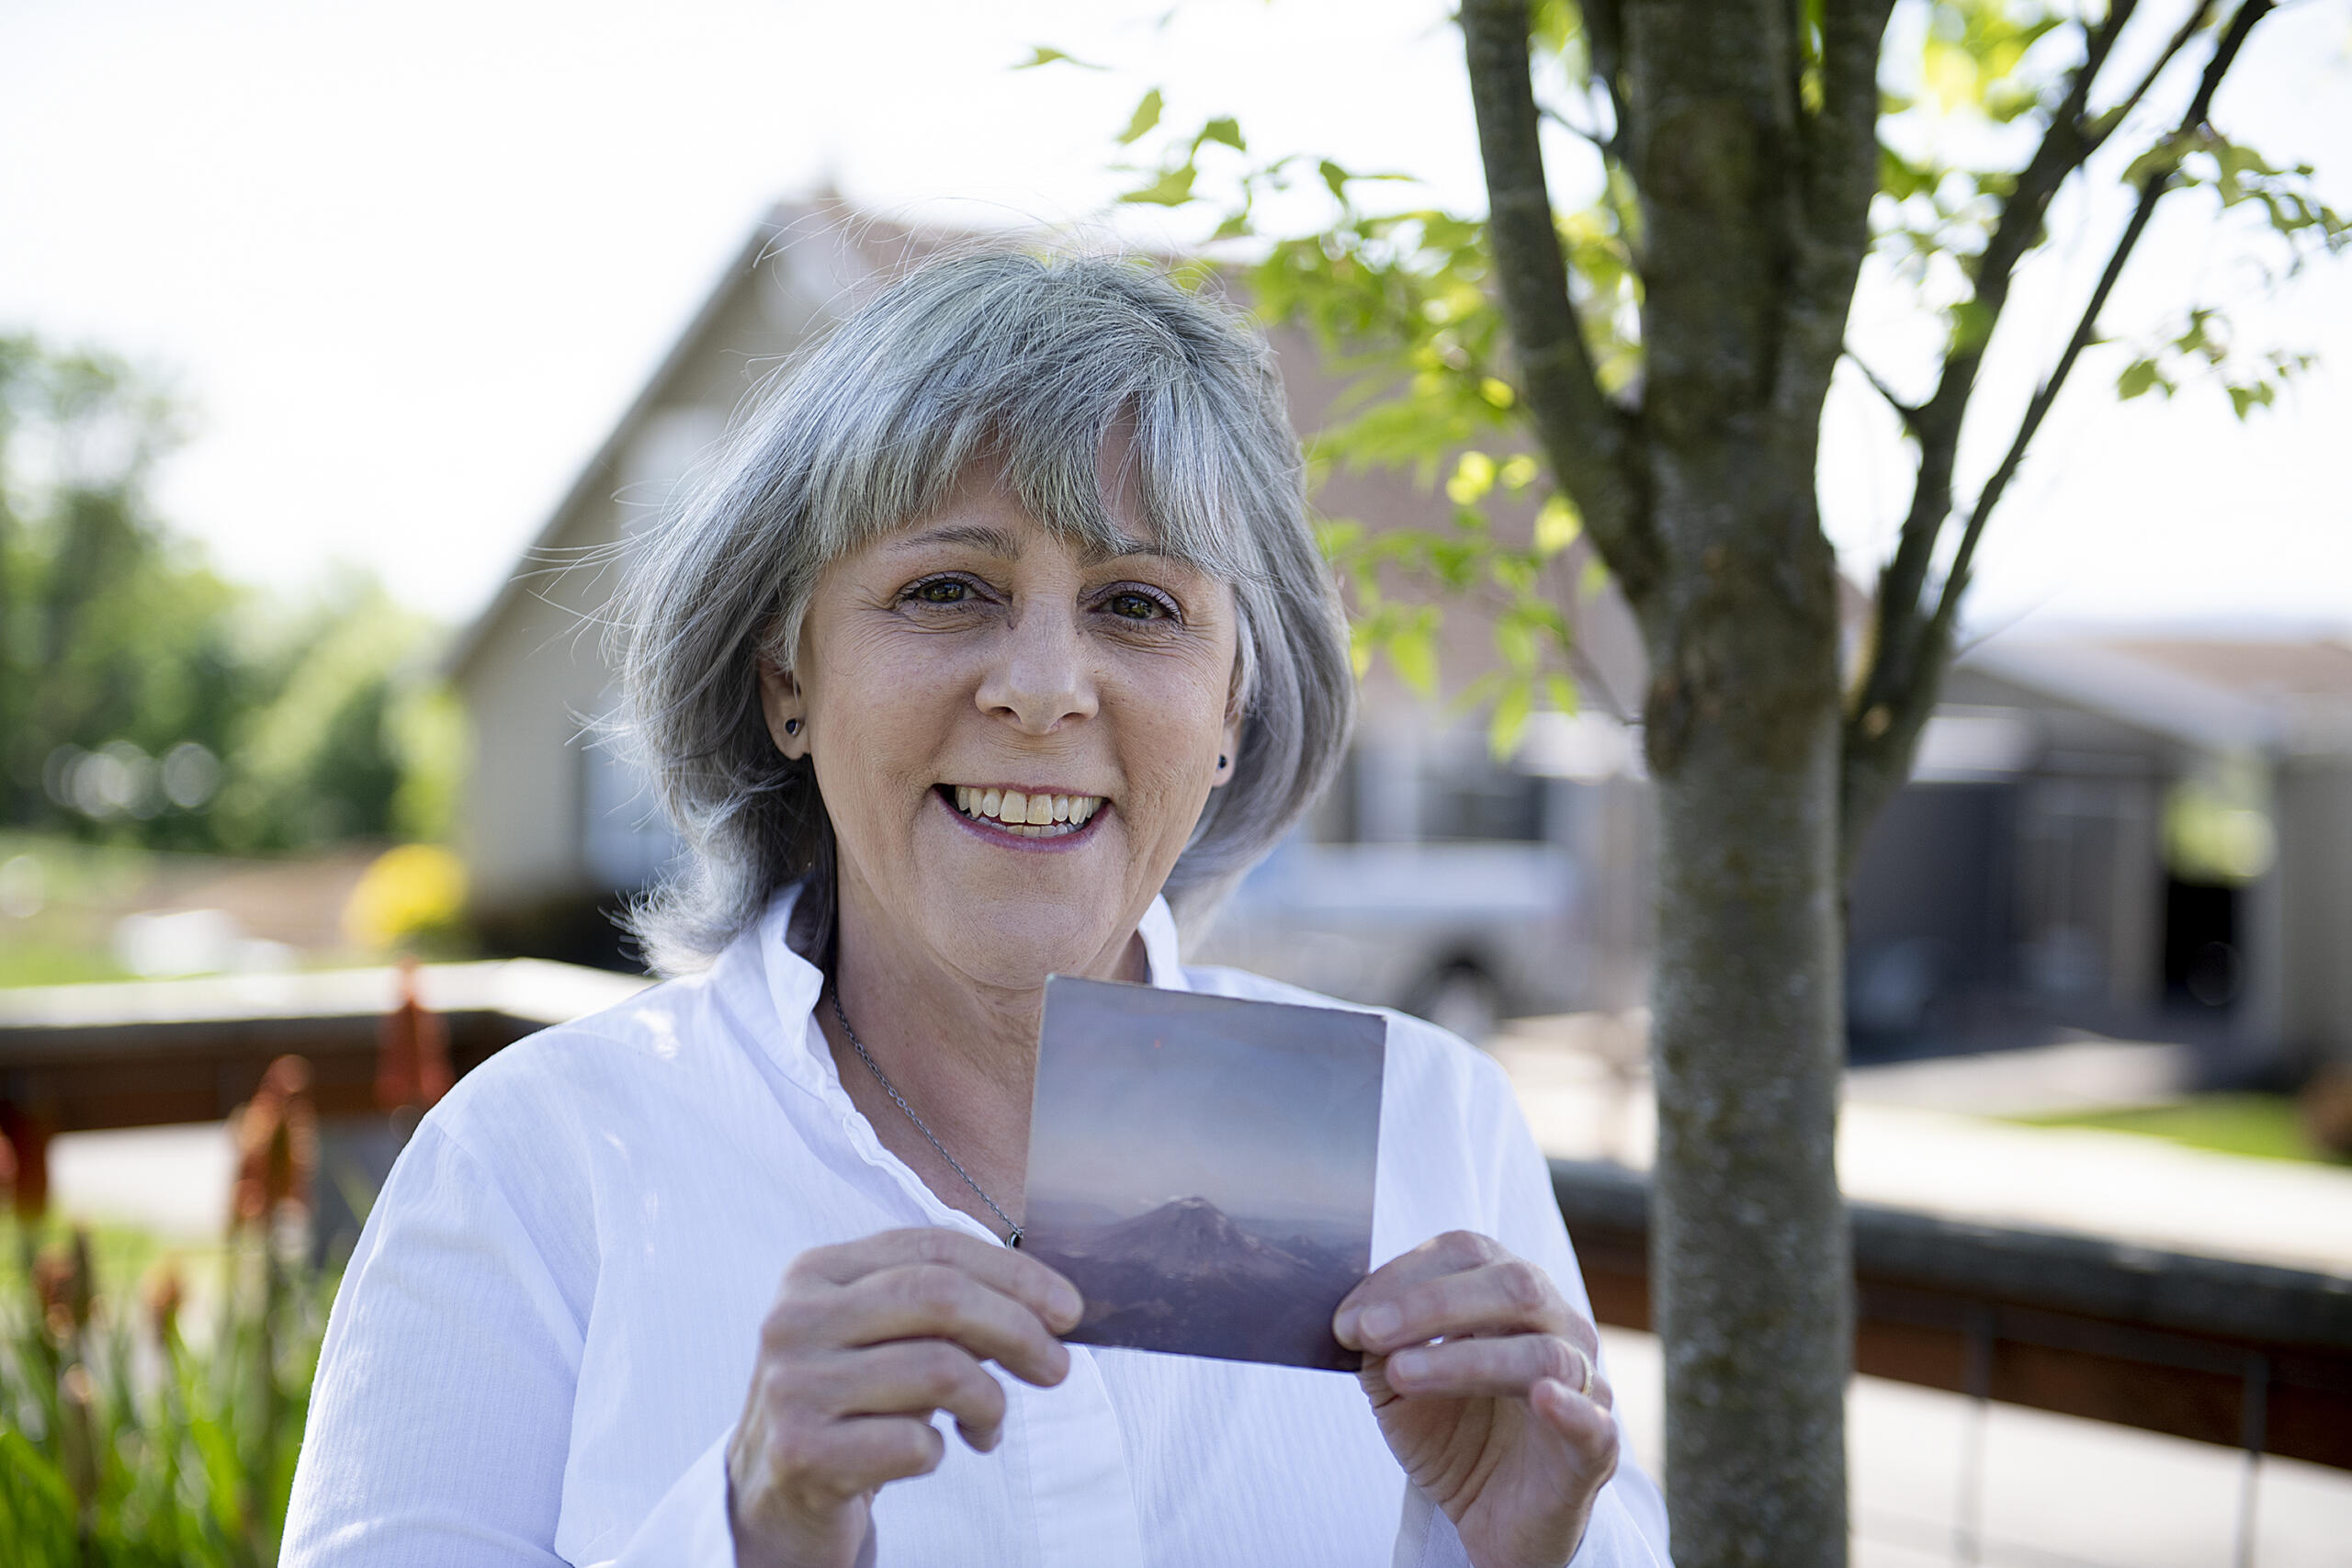 Jaquie Cole of Ridgefield pauses for a portrait with a photo she took of Mount St. Helens in 1980 on Monday afternoon, May 10, 2021. Cole and her friend flew in a small plane over Mount St. Helens on the afternoon of May 17, 1980, less than 24 hours before the big eruption.